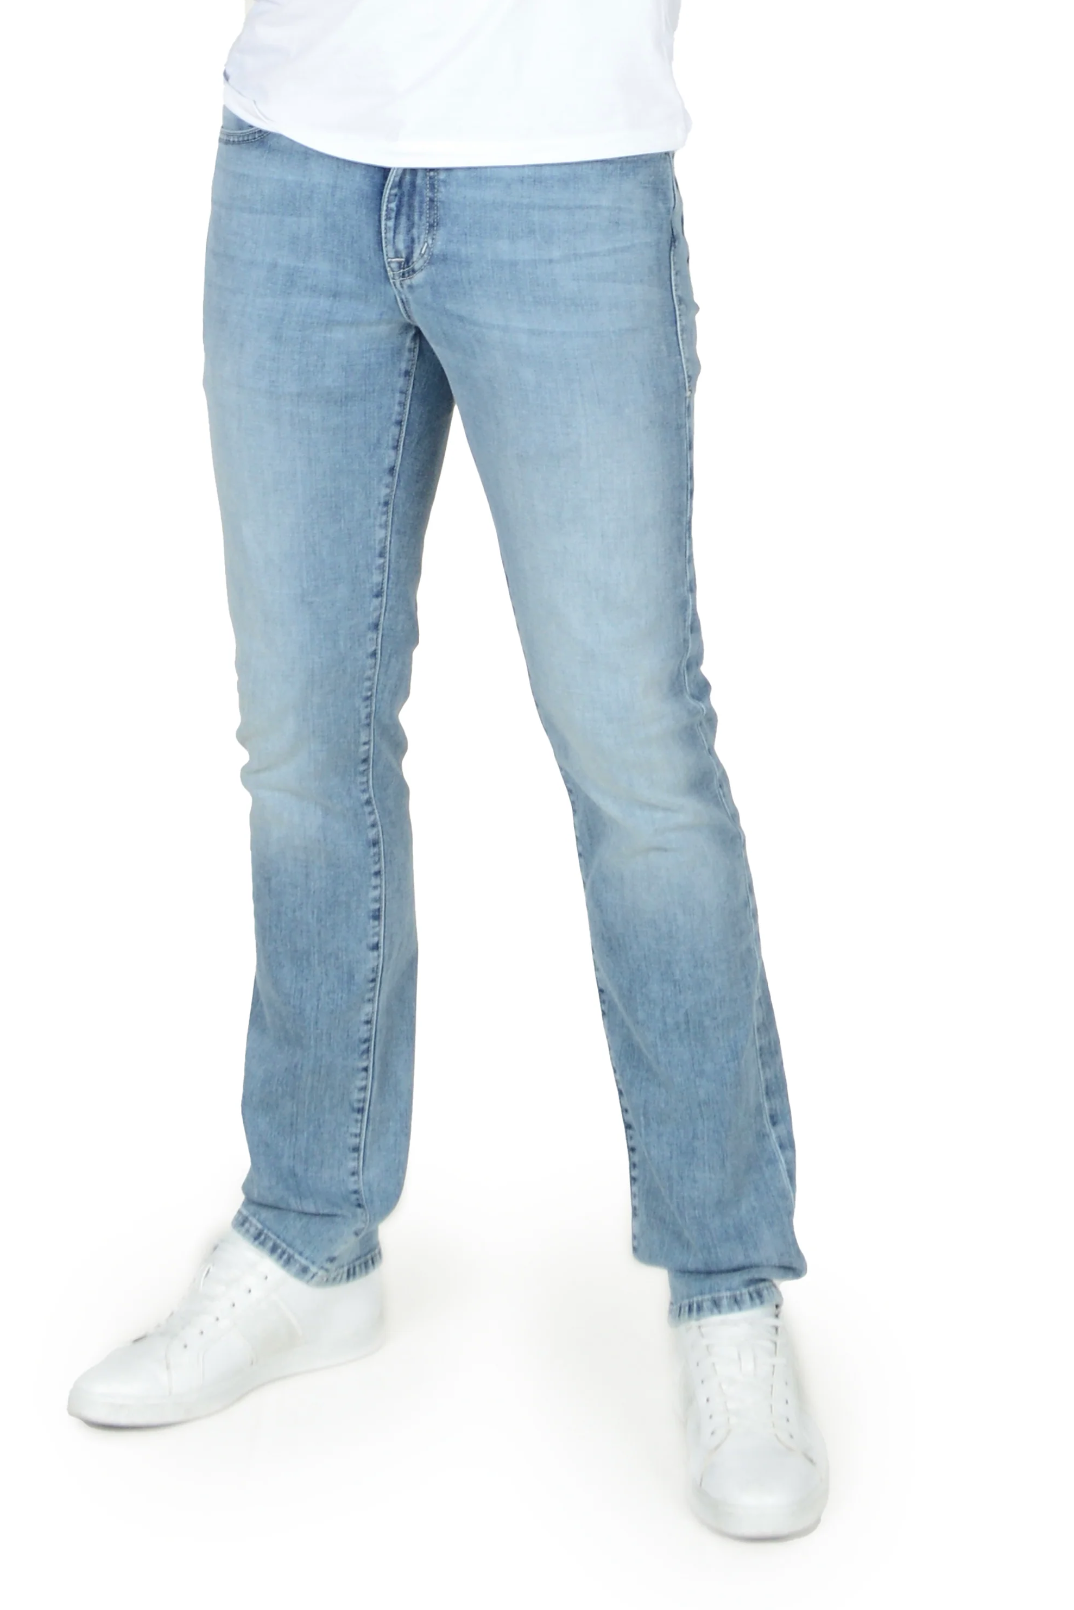 Adrien: Fidelity Denim Review and Outfit. - Looks Good from the Back